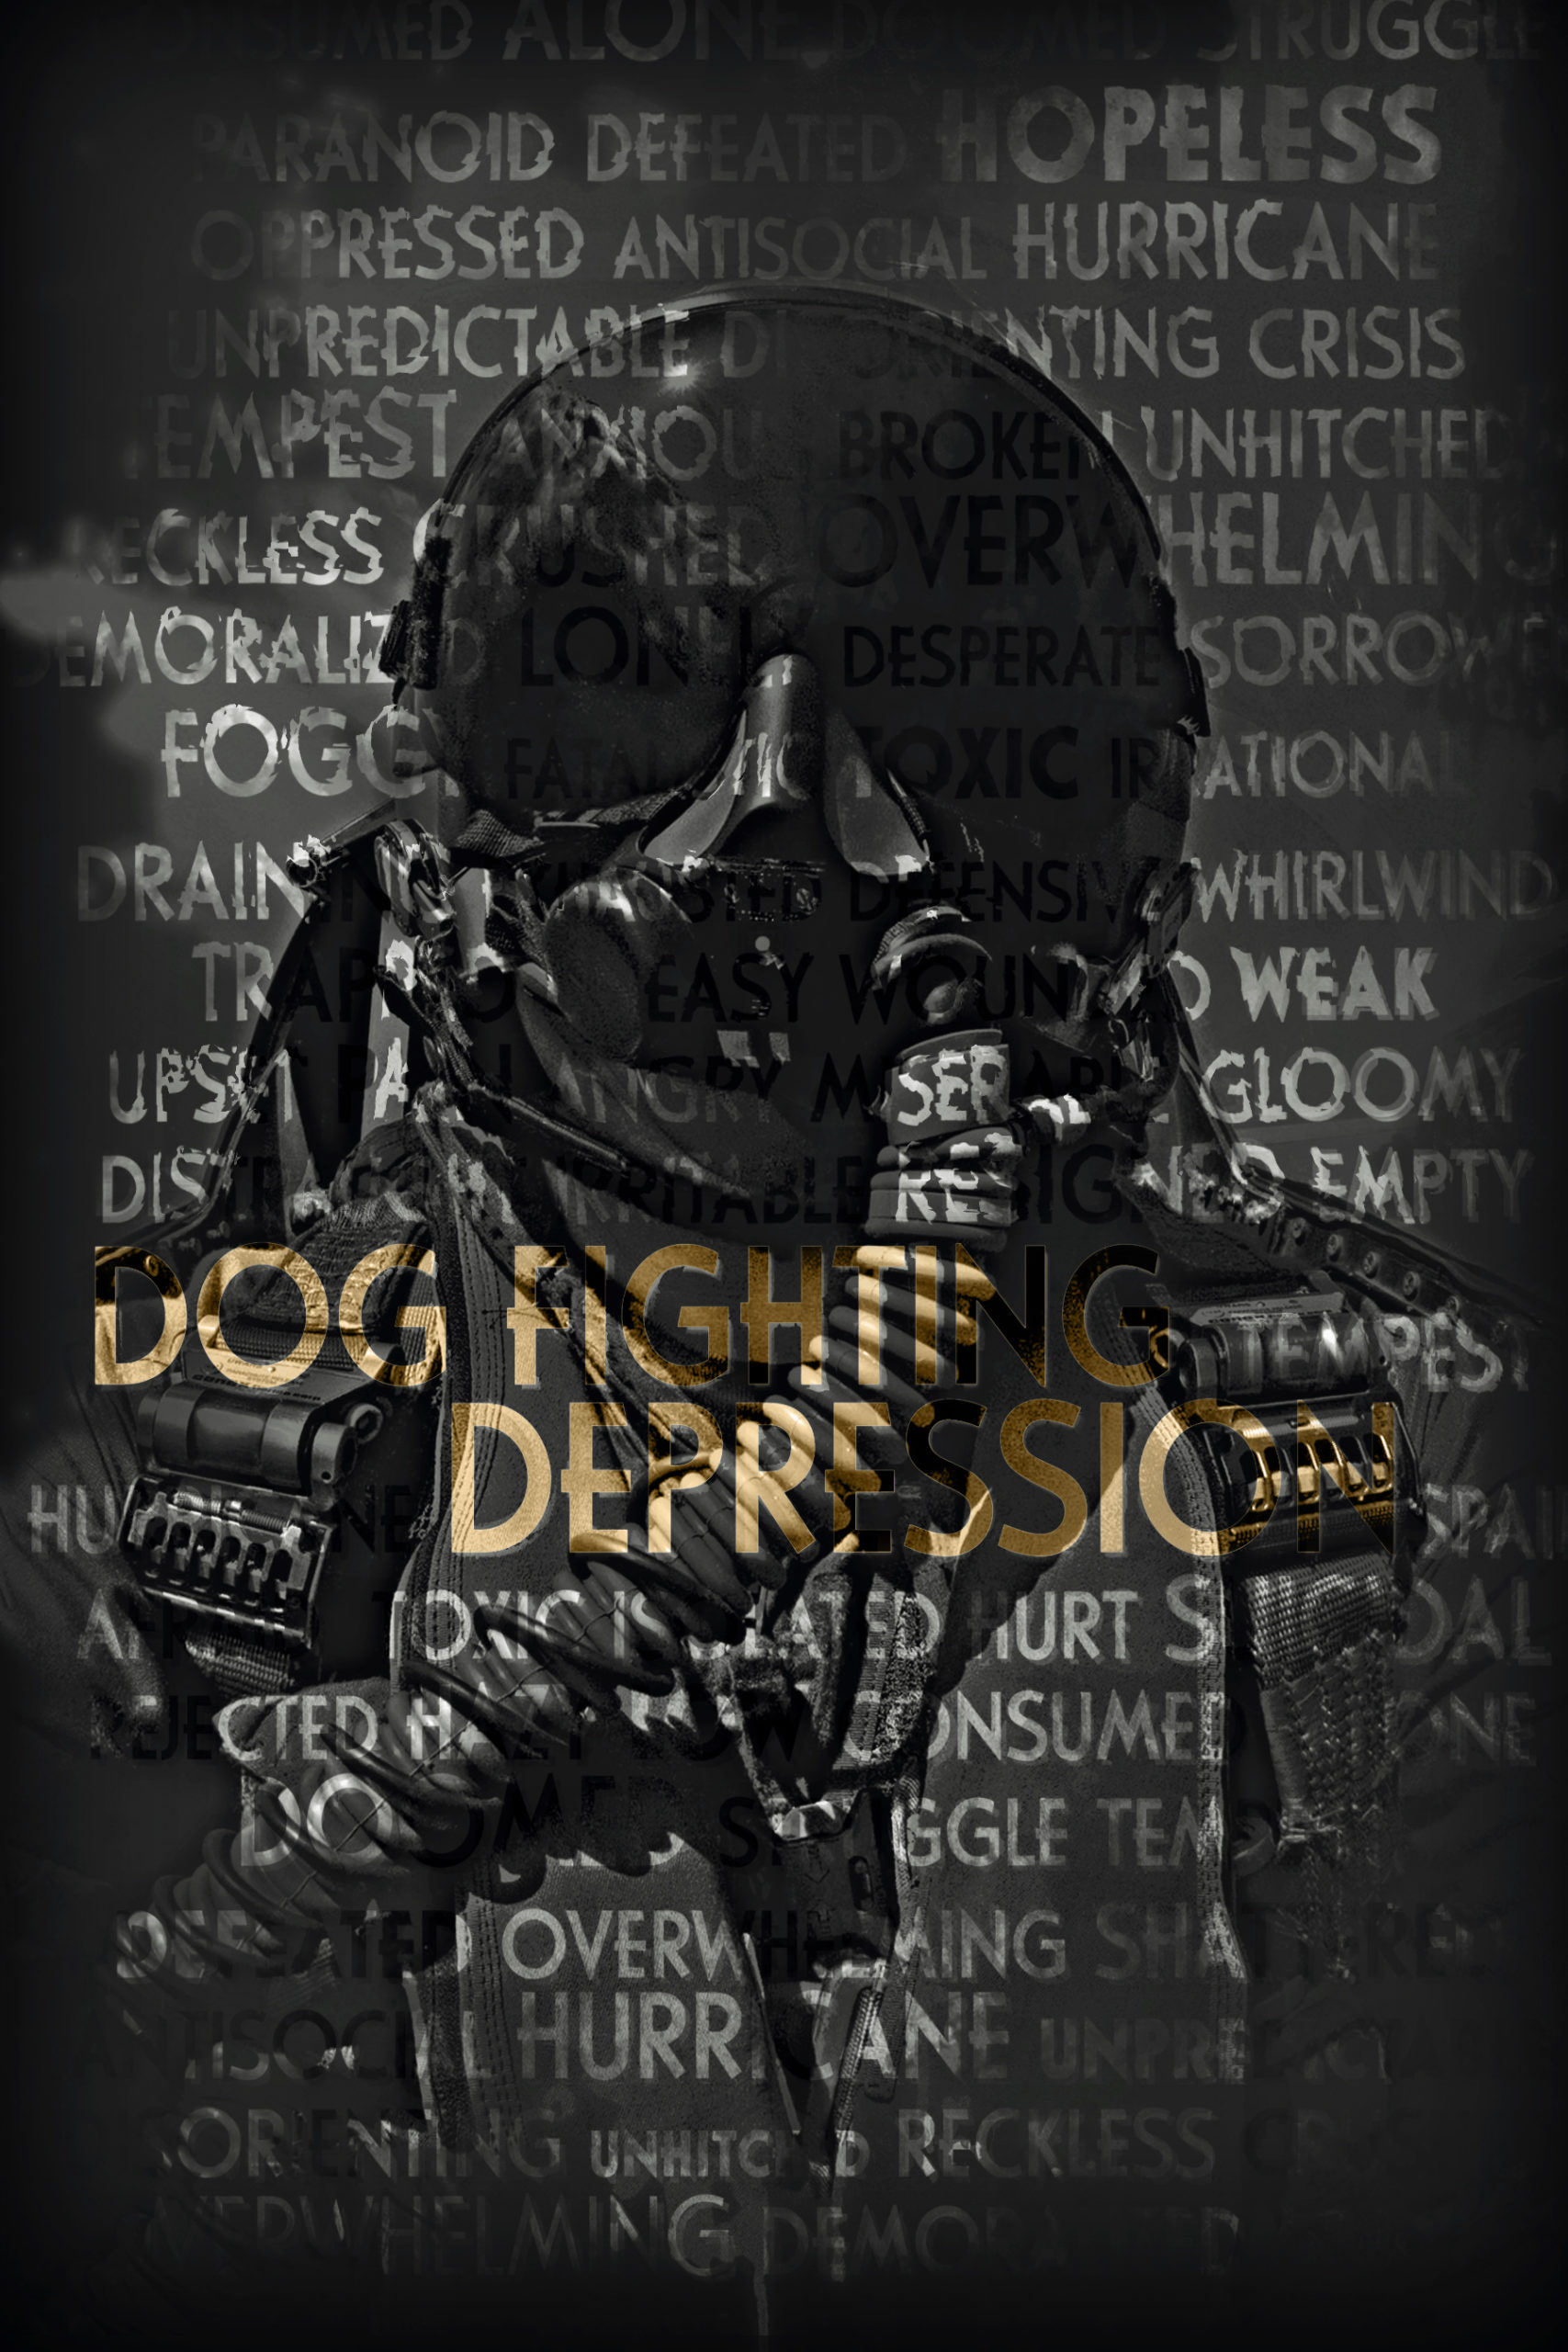 Dave Dequeljoe dogfighting depression book cover final oct 13 2018